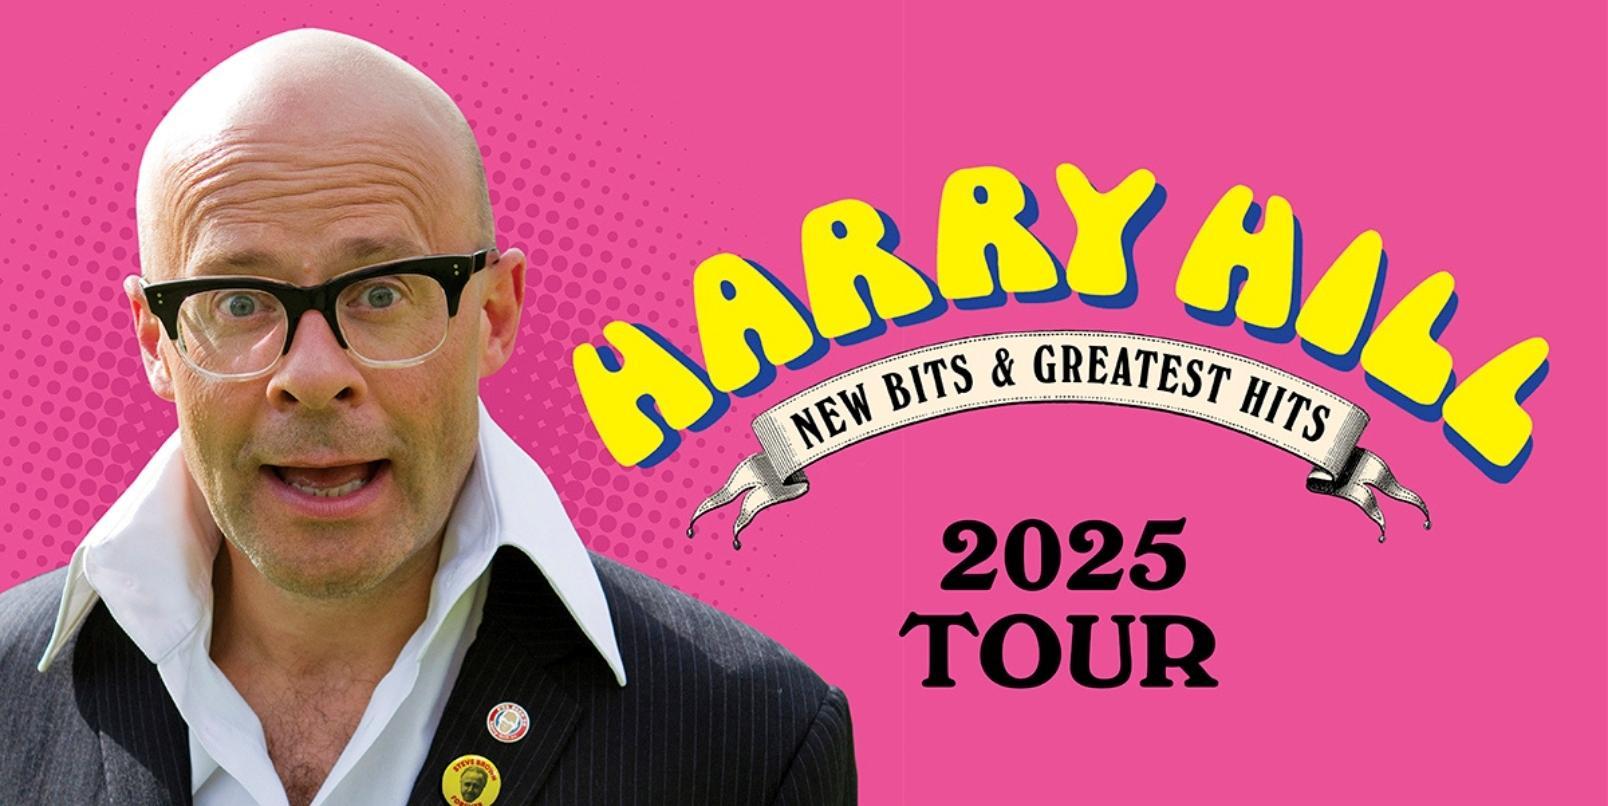 Harry Hill new Bits and Greatest Hits - 2025 Tour in yellow text on a pink background next to a photo of Harry Hill